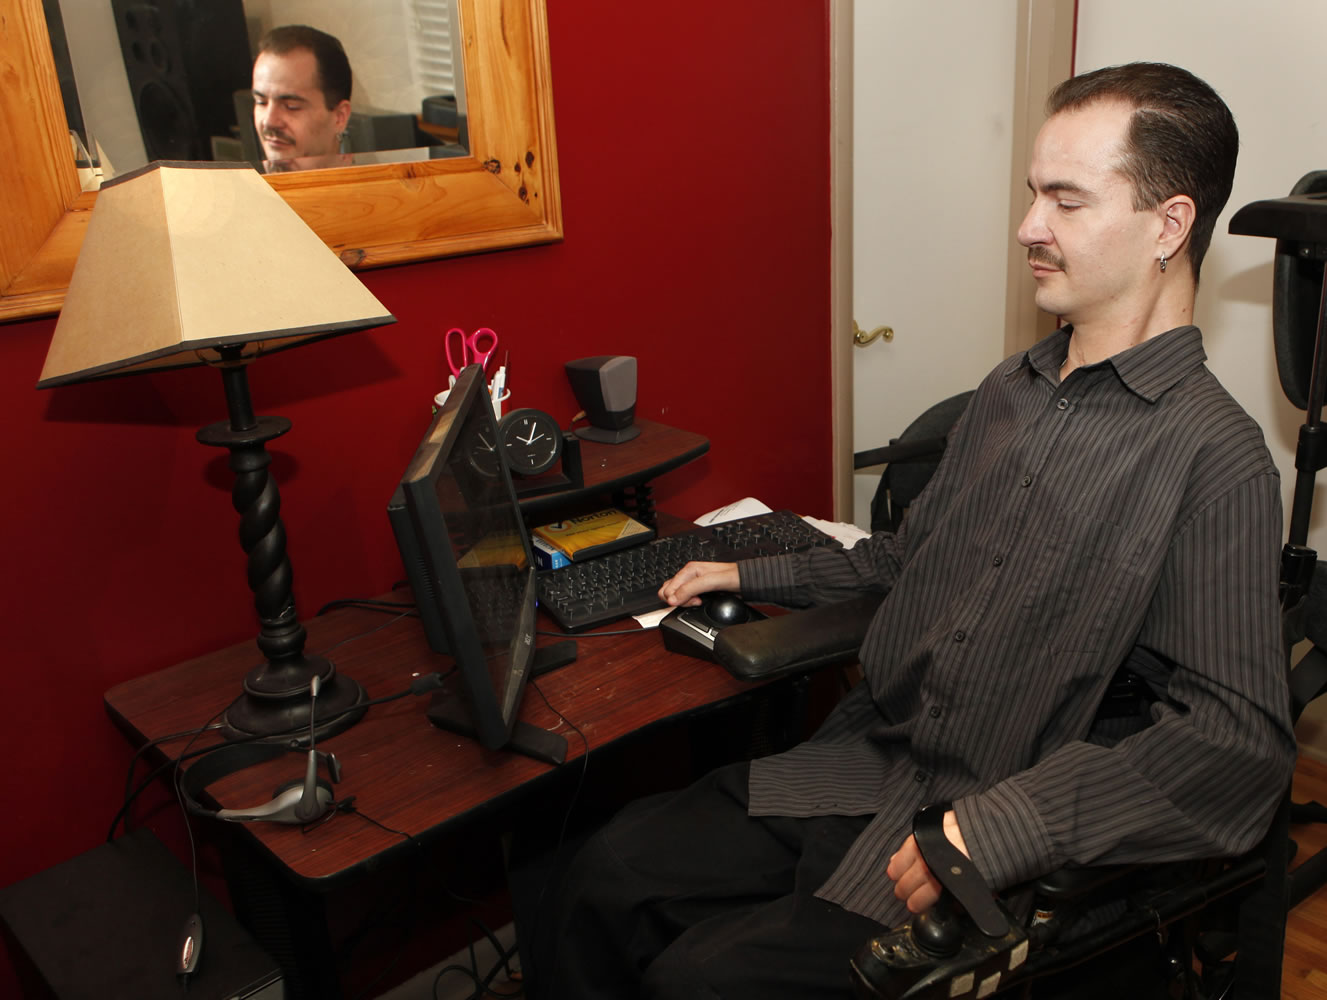 Brandon Coats works on his computer at his home in Denver on Thursday. Coats' Colorado case is giving employers pause. Coats, 33, was a telephone operator for Dish Network. Paralyzed as a teenager in a car crash, he's also been a medical marijuana patient in Colorado since 2009.